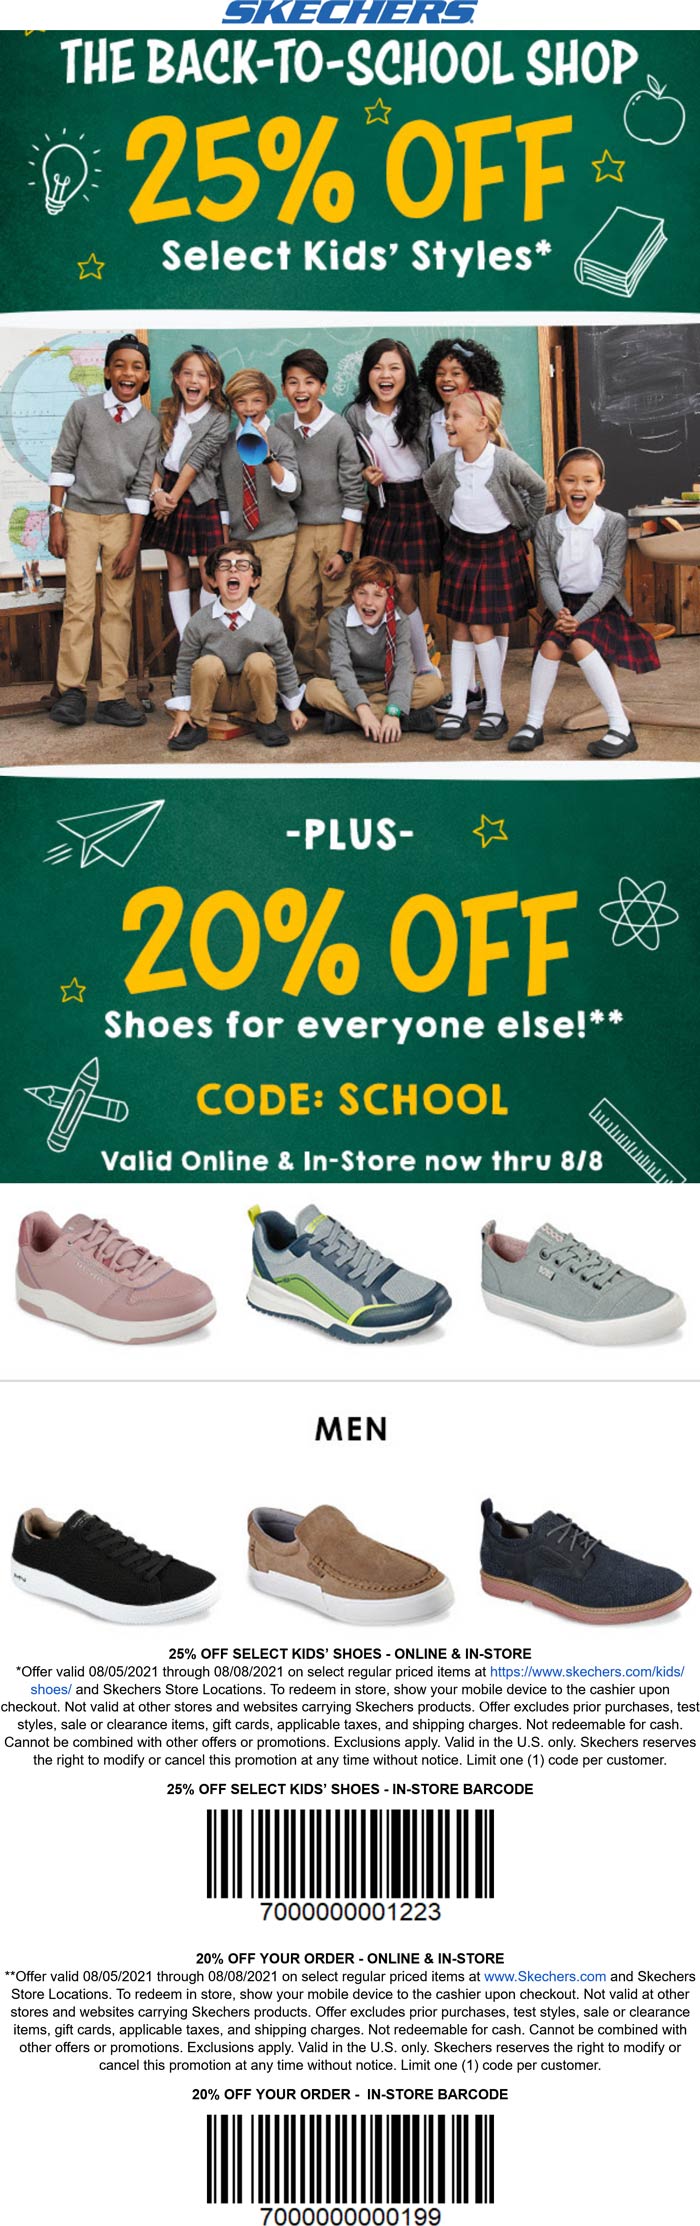 Skechers stores Coupon  20-25% off back-to-school at Skechers shoes, ditto online #skechers 